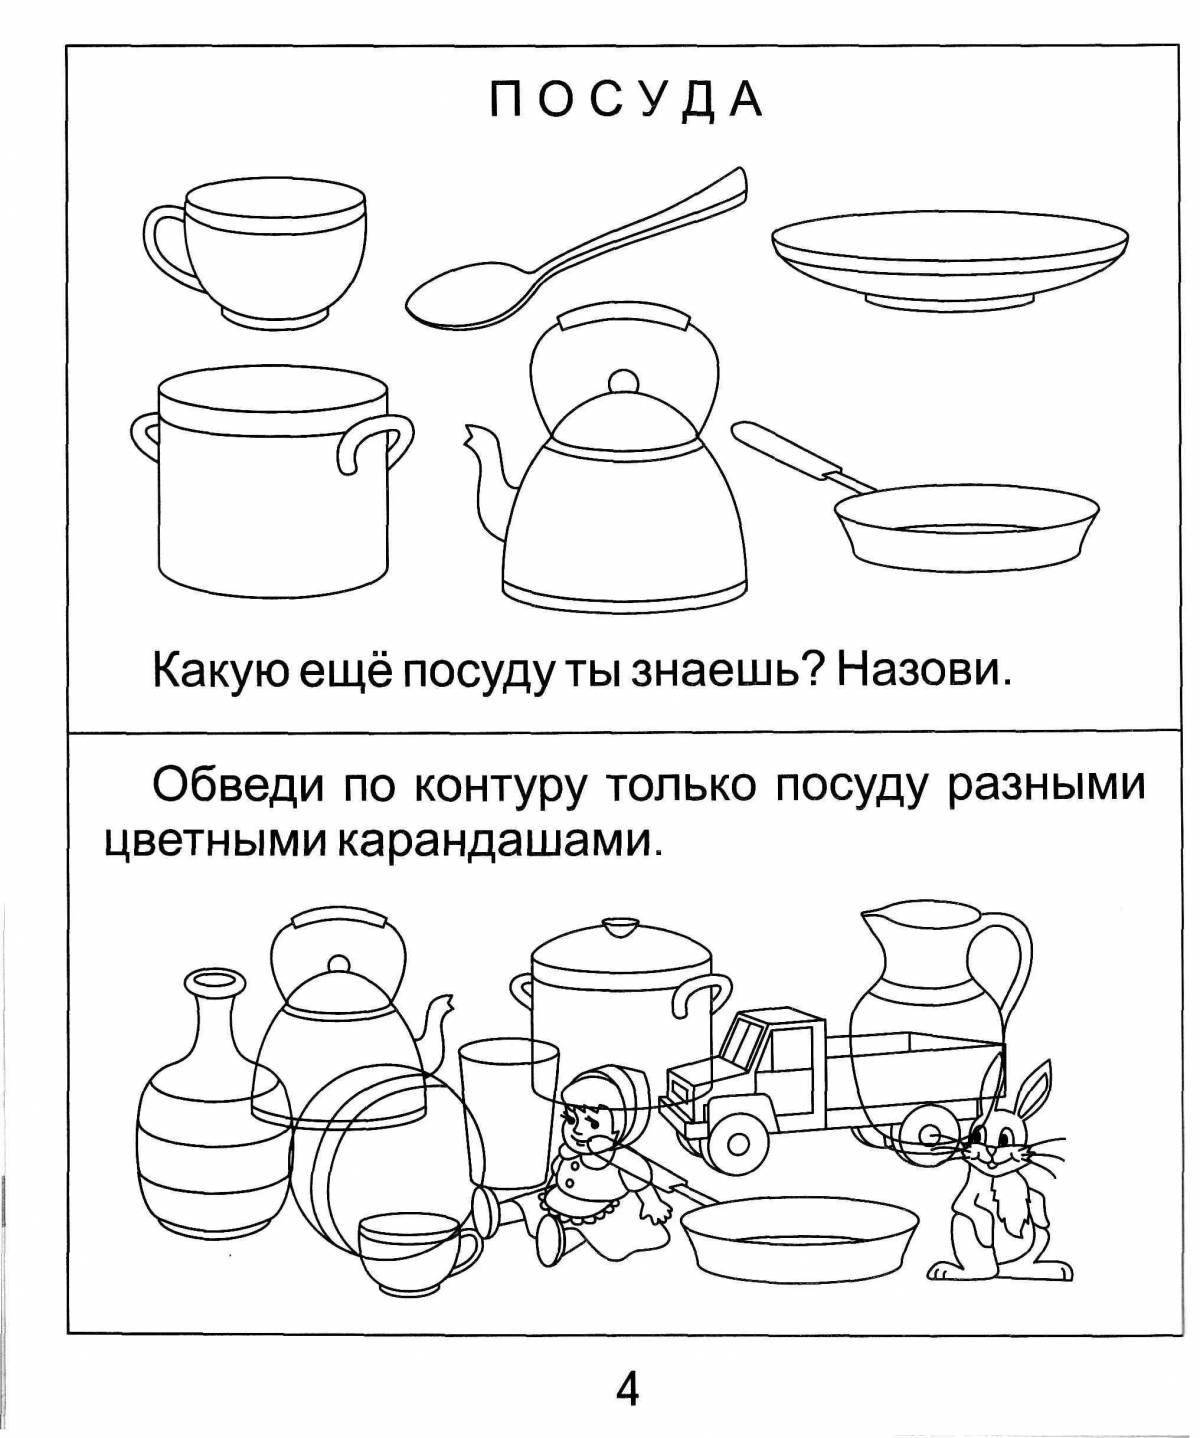 Coloring pages with colorful meals for preschoolers